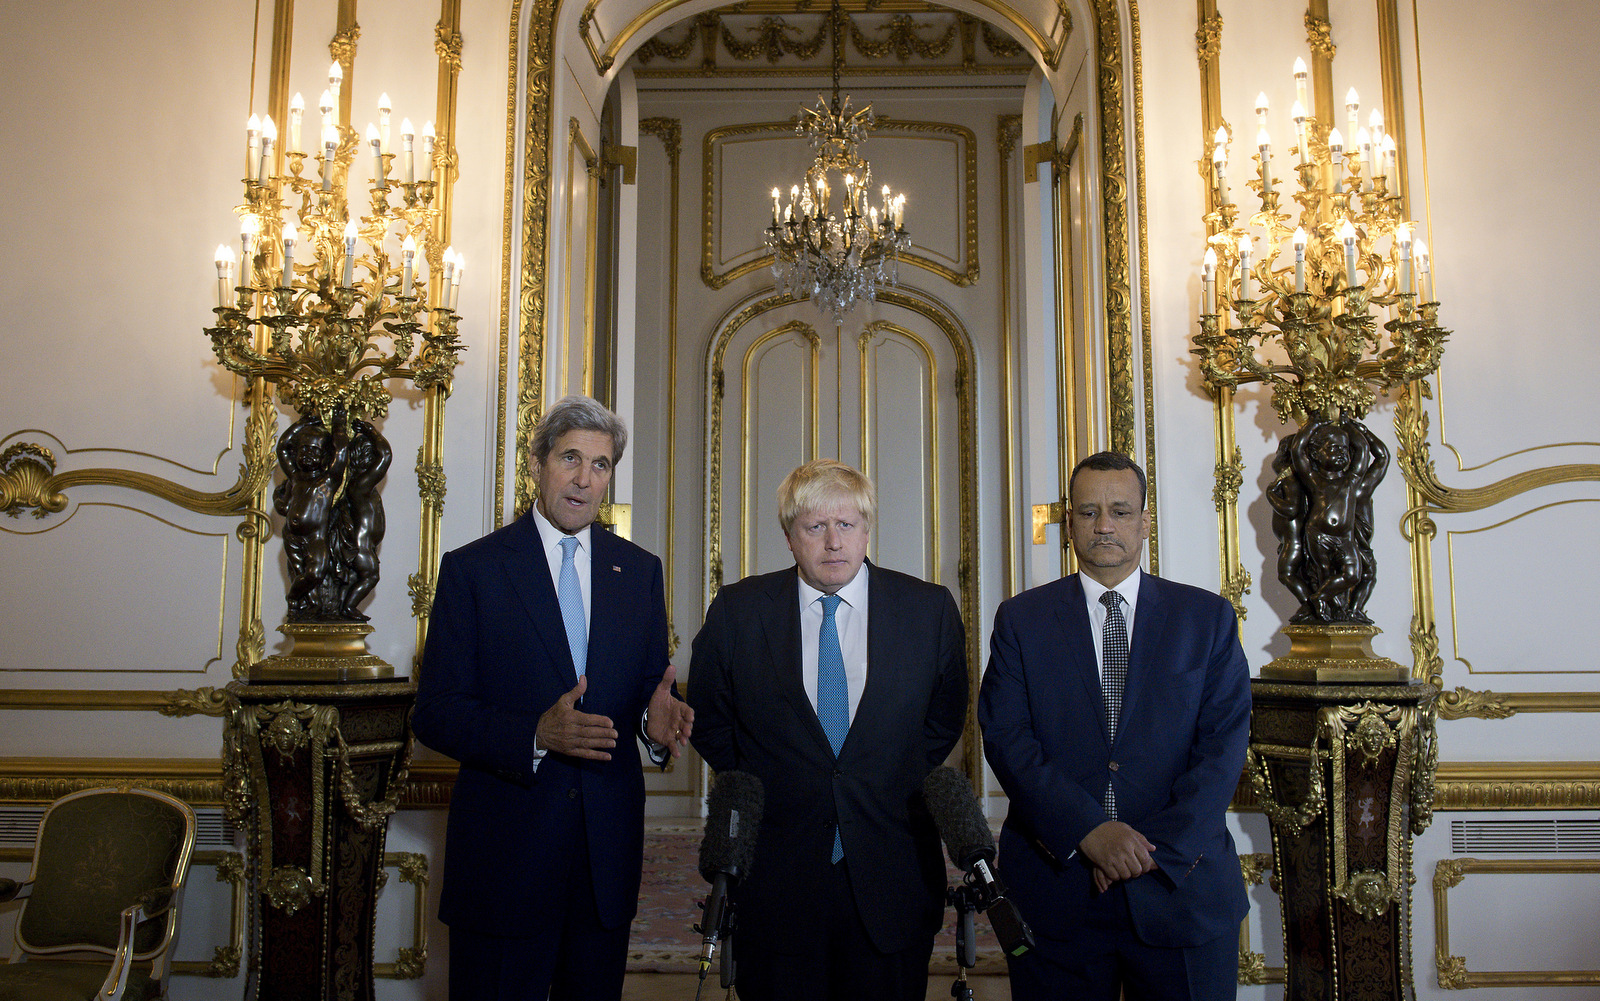 Making a joint statement on Yemen, with left - right, US Secretary of State John Kerry, British Foreign Secretary Boris Johnson and UN Special Envoy for Yemen Ismail Ould Cheikh Ahmed, at Lancaster House in London Sunday Oct. 16, 2016. (Justin Tallis/AP)